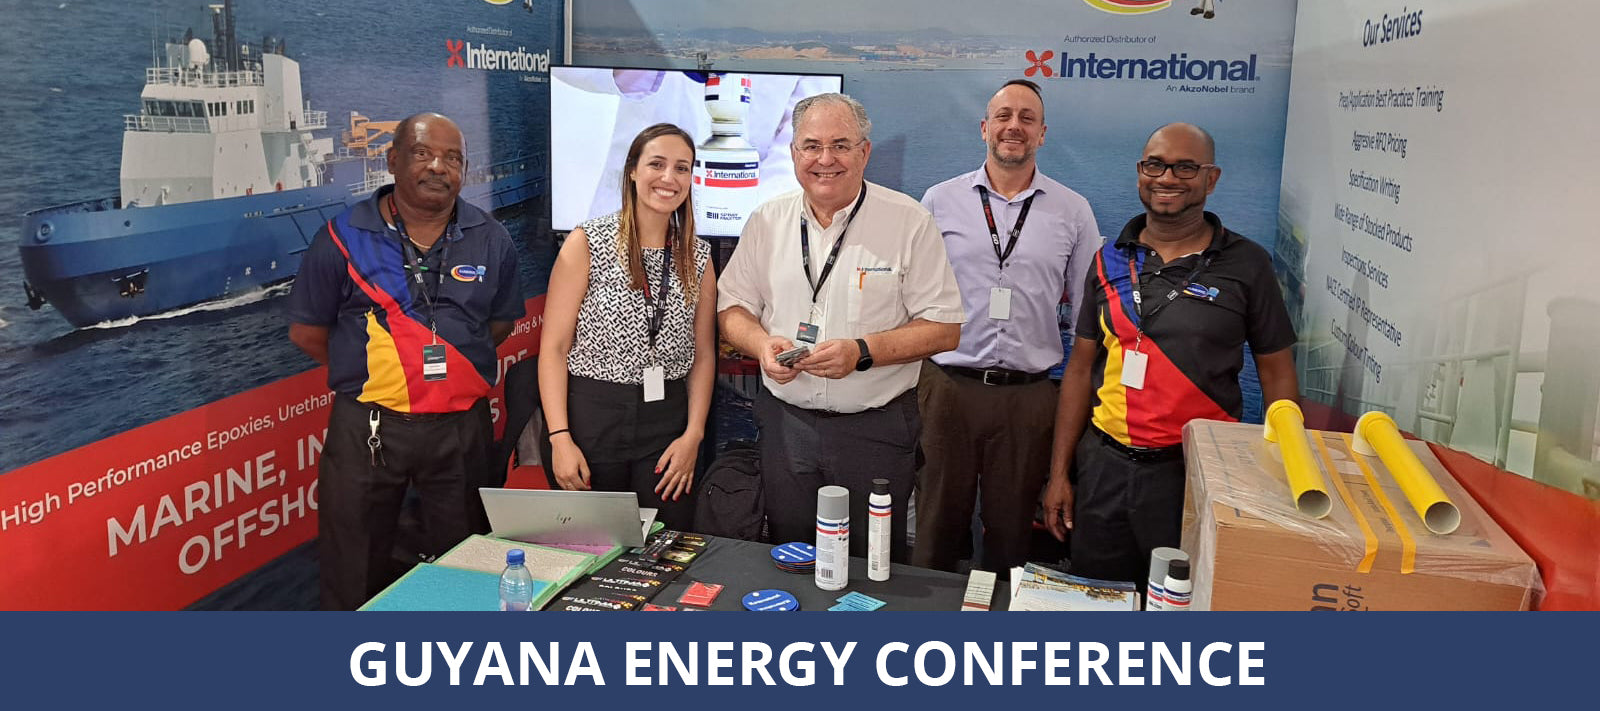 Guyana Energy Conference - Harris Paints teams up with International Paints To Service Guyana’s O&G And Marine Sectors